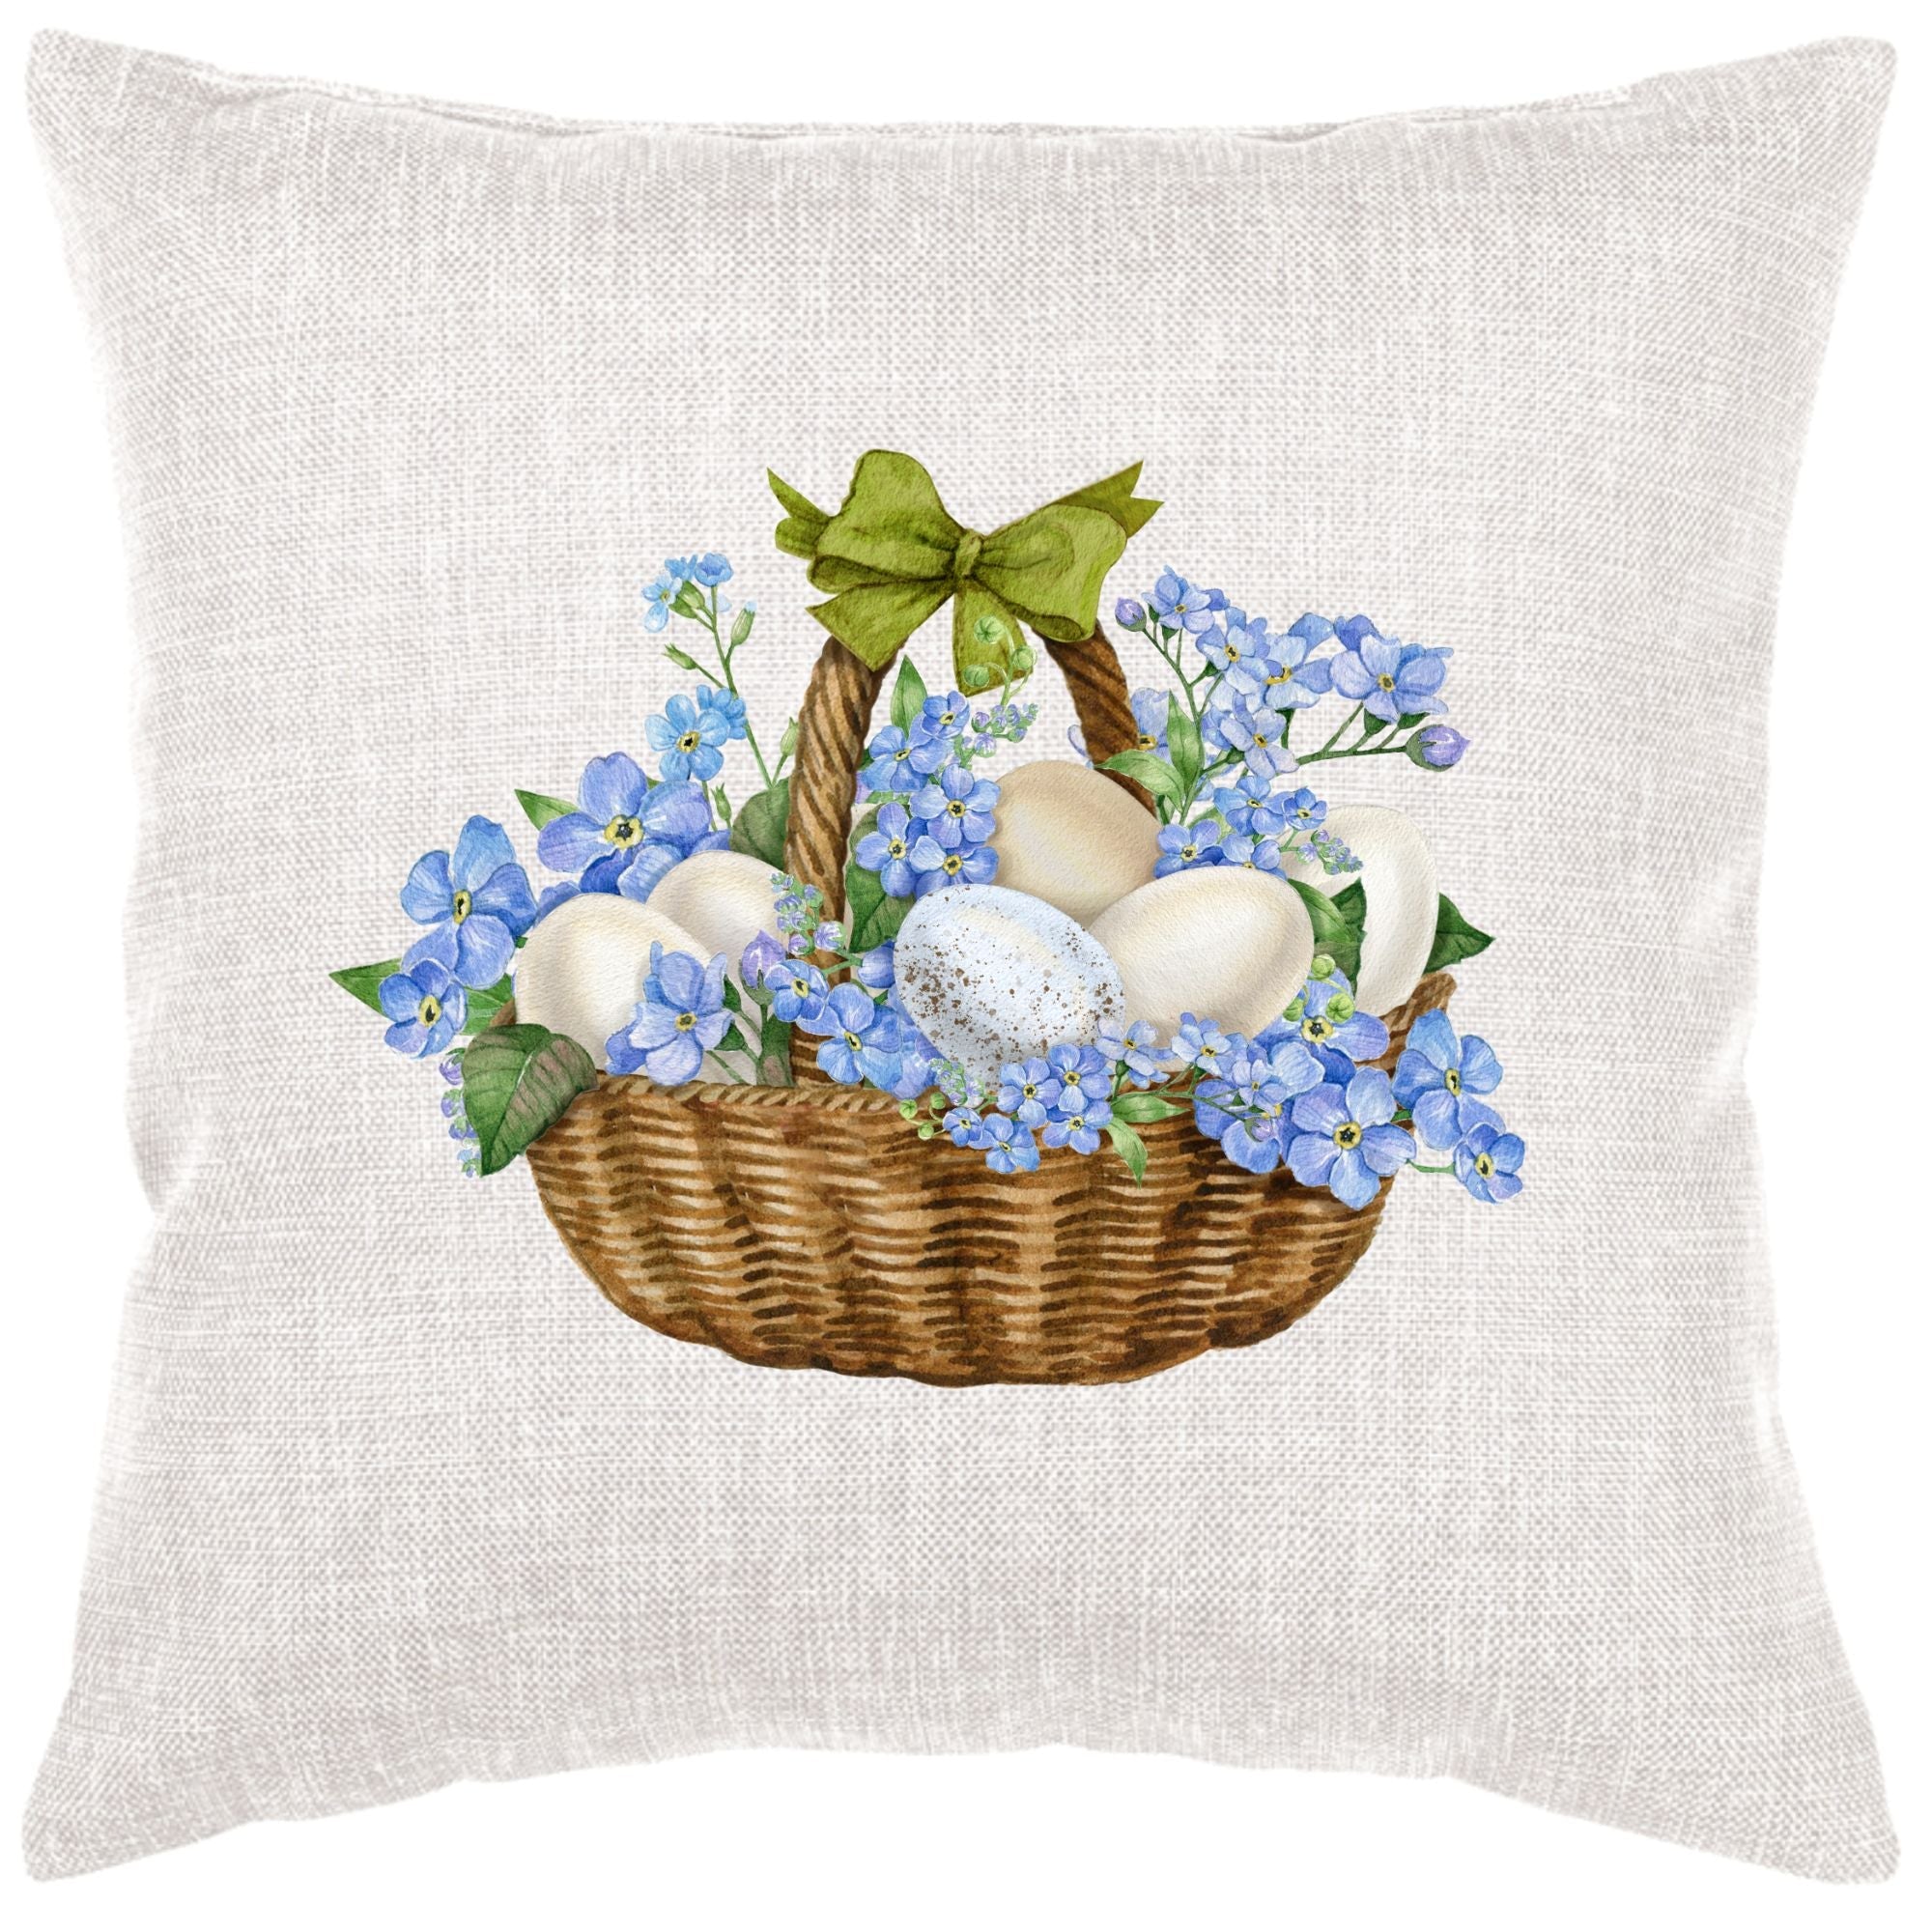 Basket Of Eggs Down Pillow